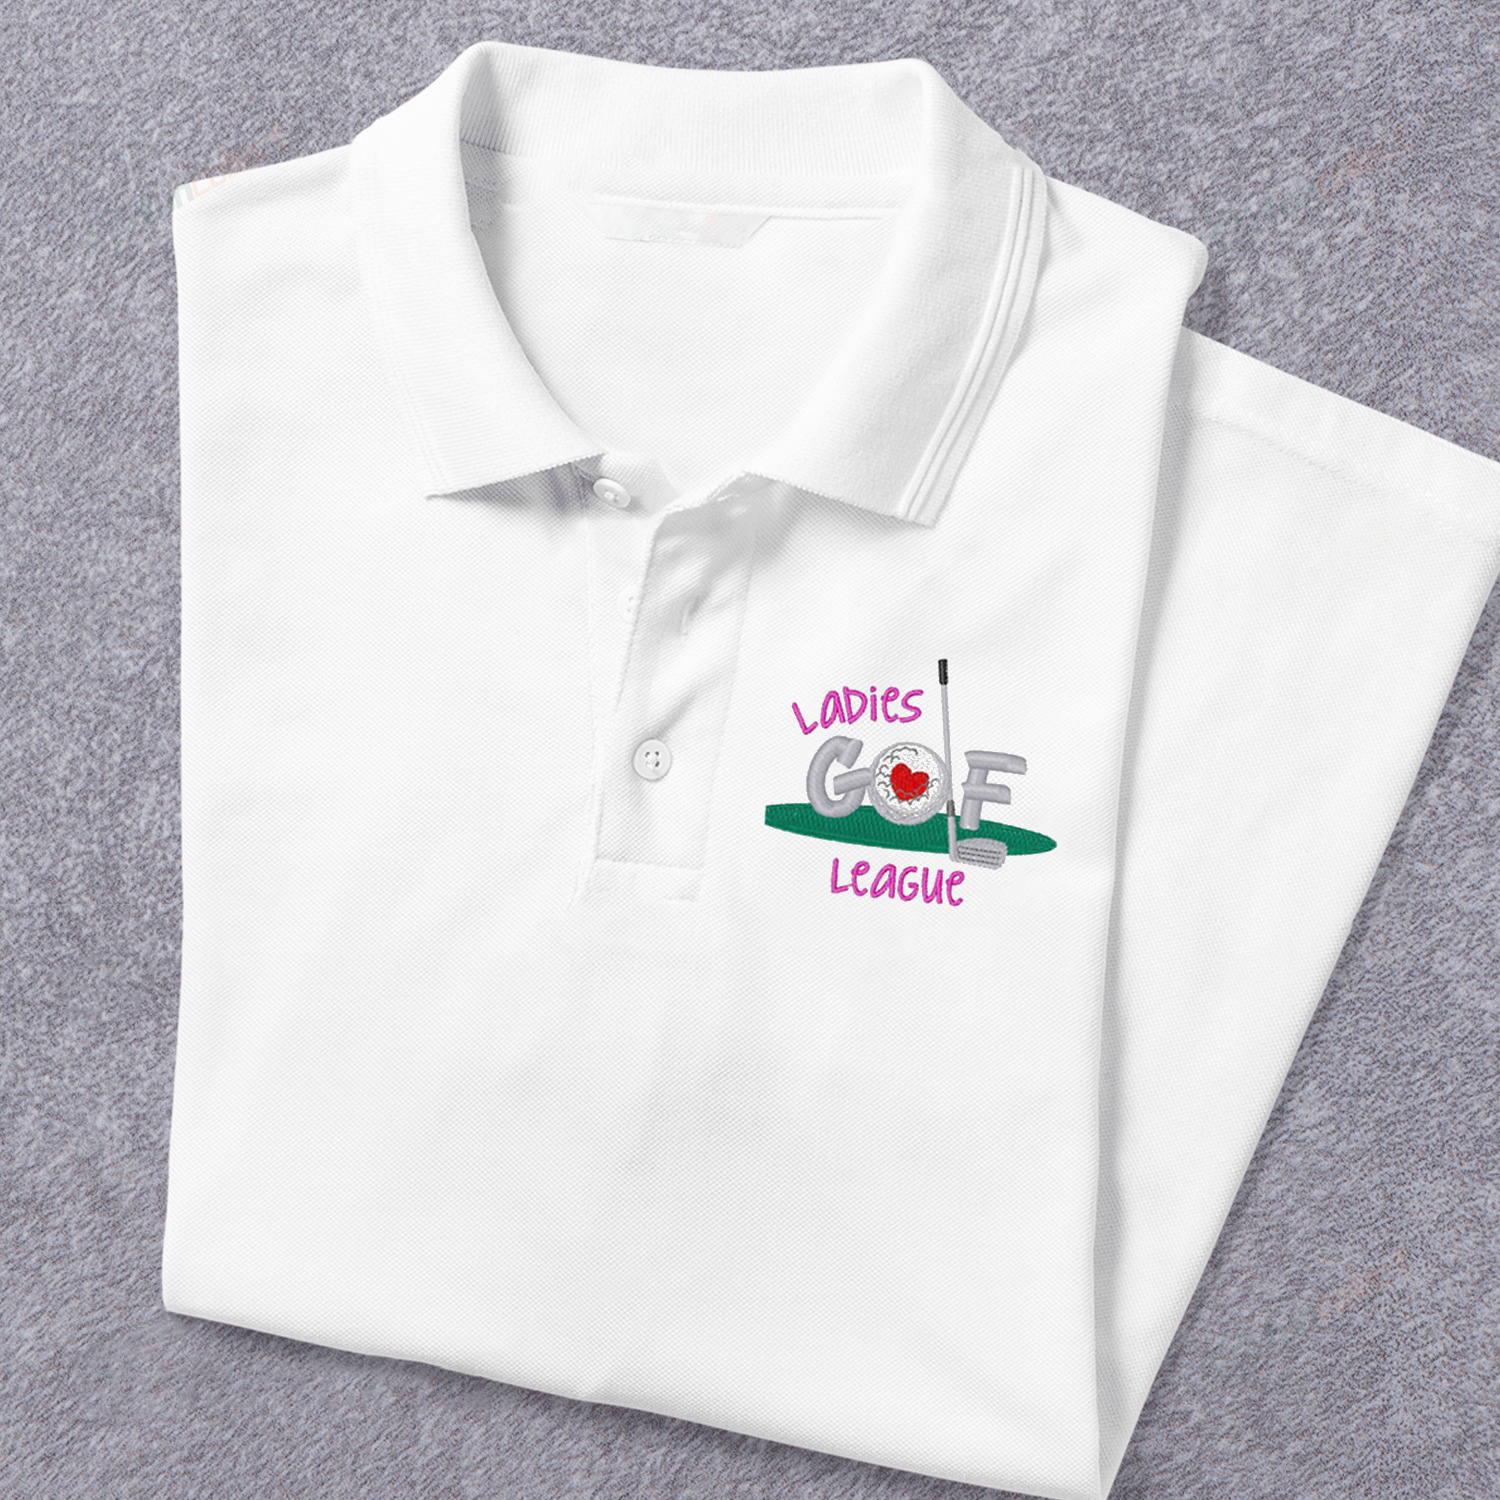 Ladies League Embroidery Polo Shirts For Women Or Men/ Golf Shirt/ Embroidery Shirt